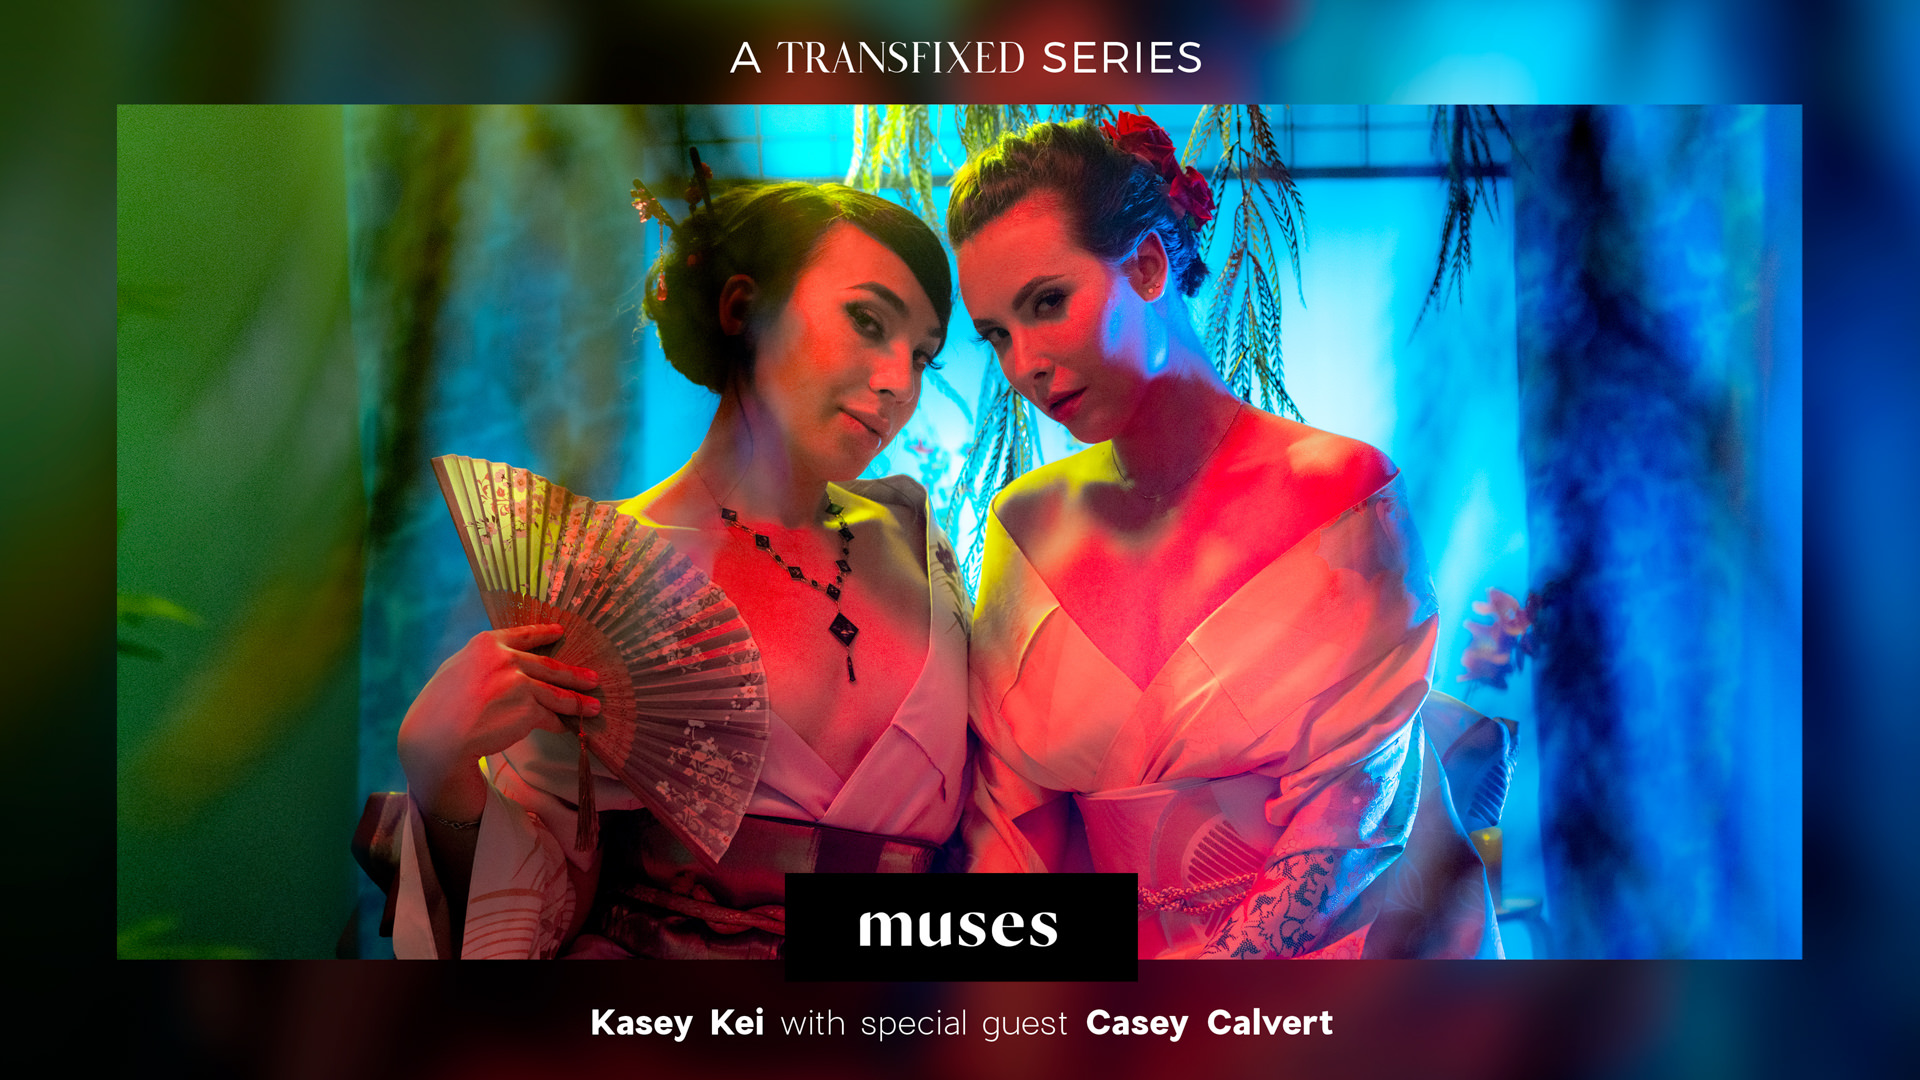 MUSES: Kasey Kei, Scene #01 in Transfixed series with Casey Calvert, Kasey Kei by Adult Time